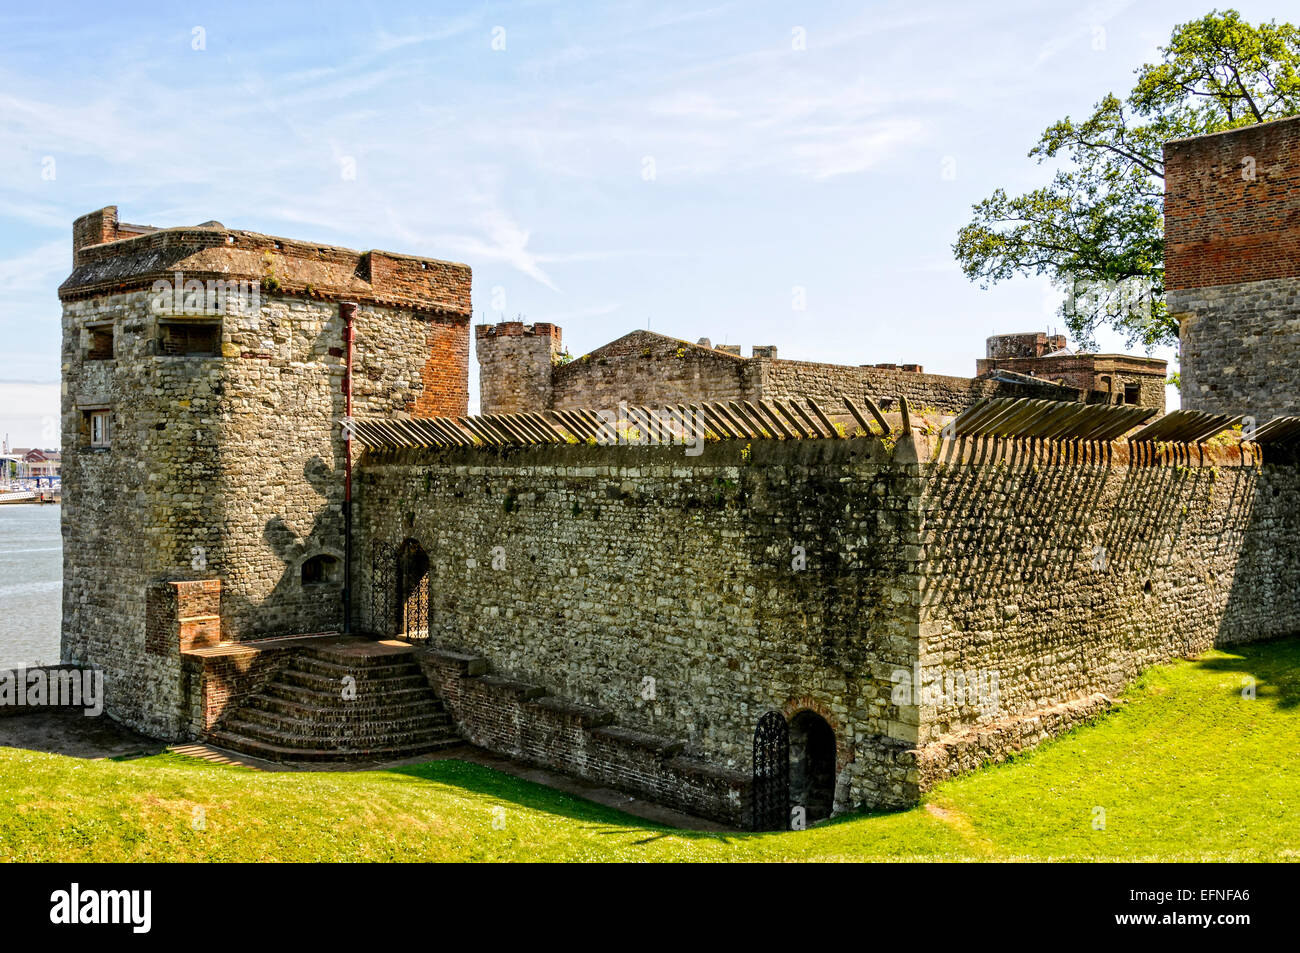 The north tower and adjoining walls embedded with sharp steel spikes of the Tudor Upnor Castle on the banks of the River Medway Stock Photo